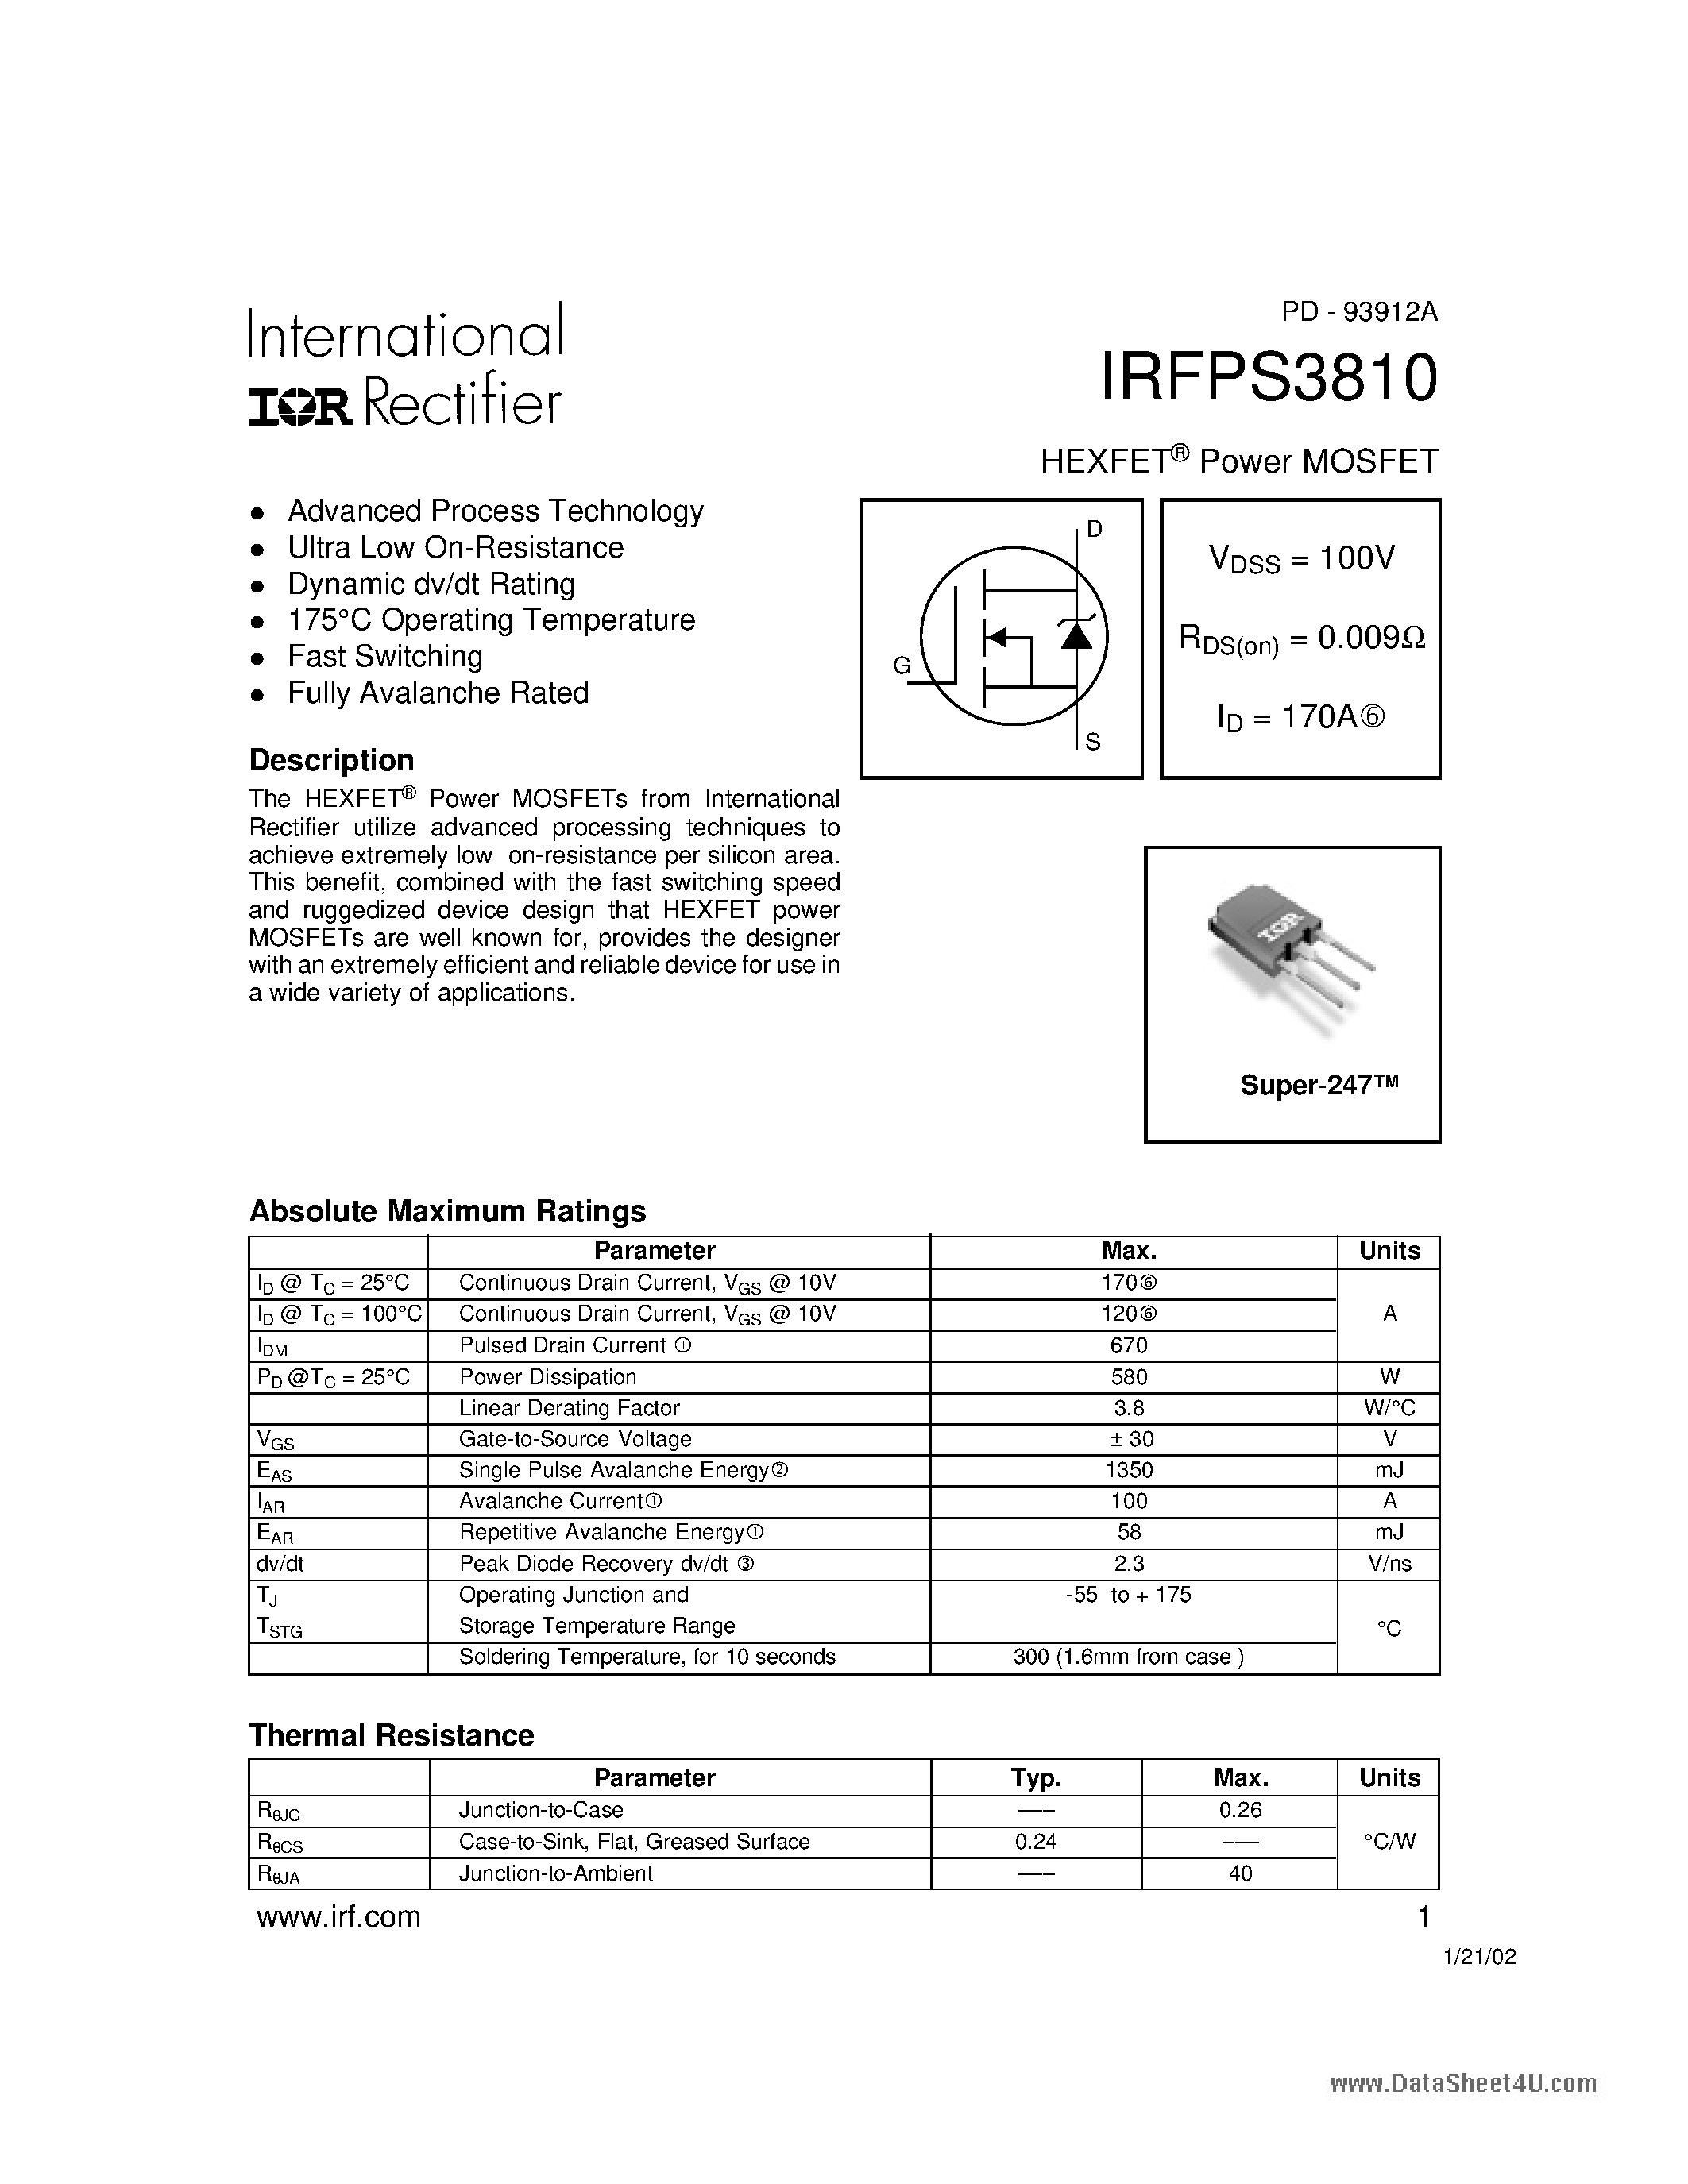 Даташит IRFPS3810 - HEXFET Power MOSFET страница 1